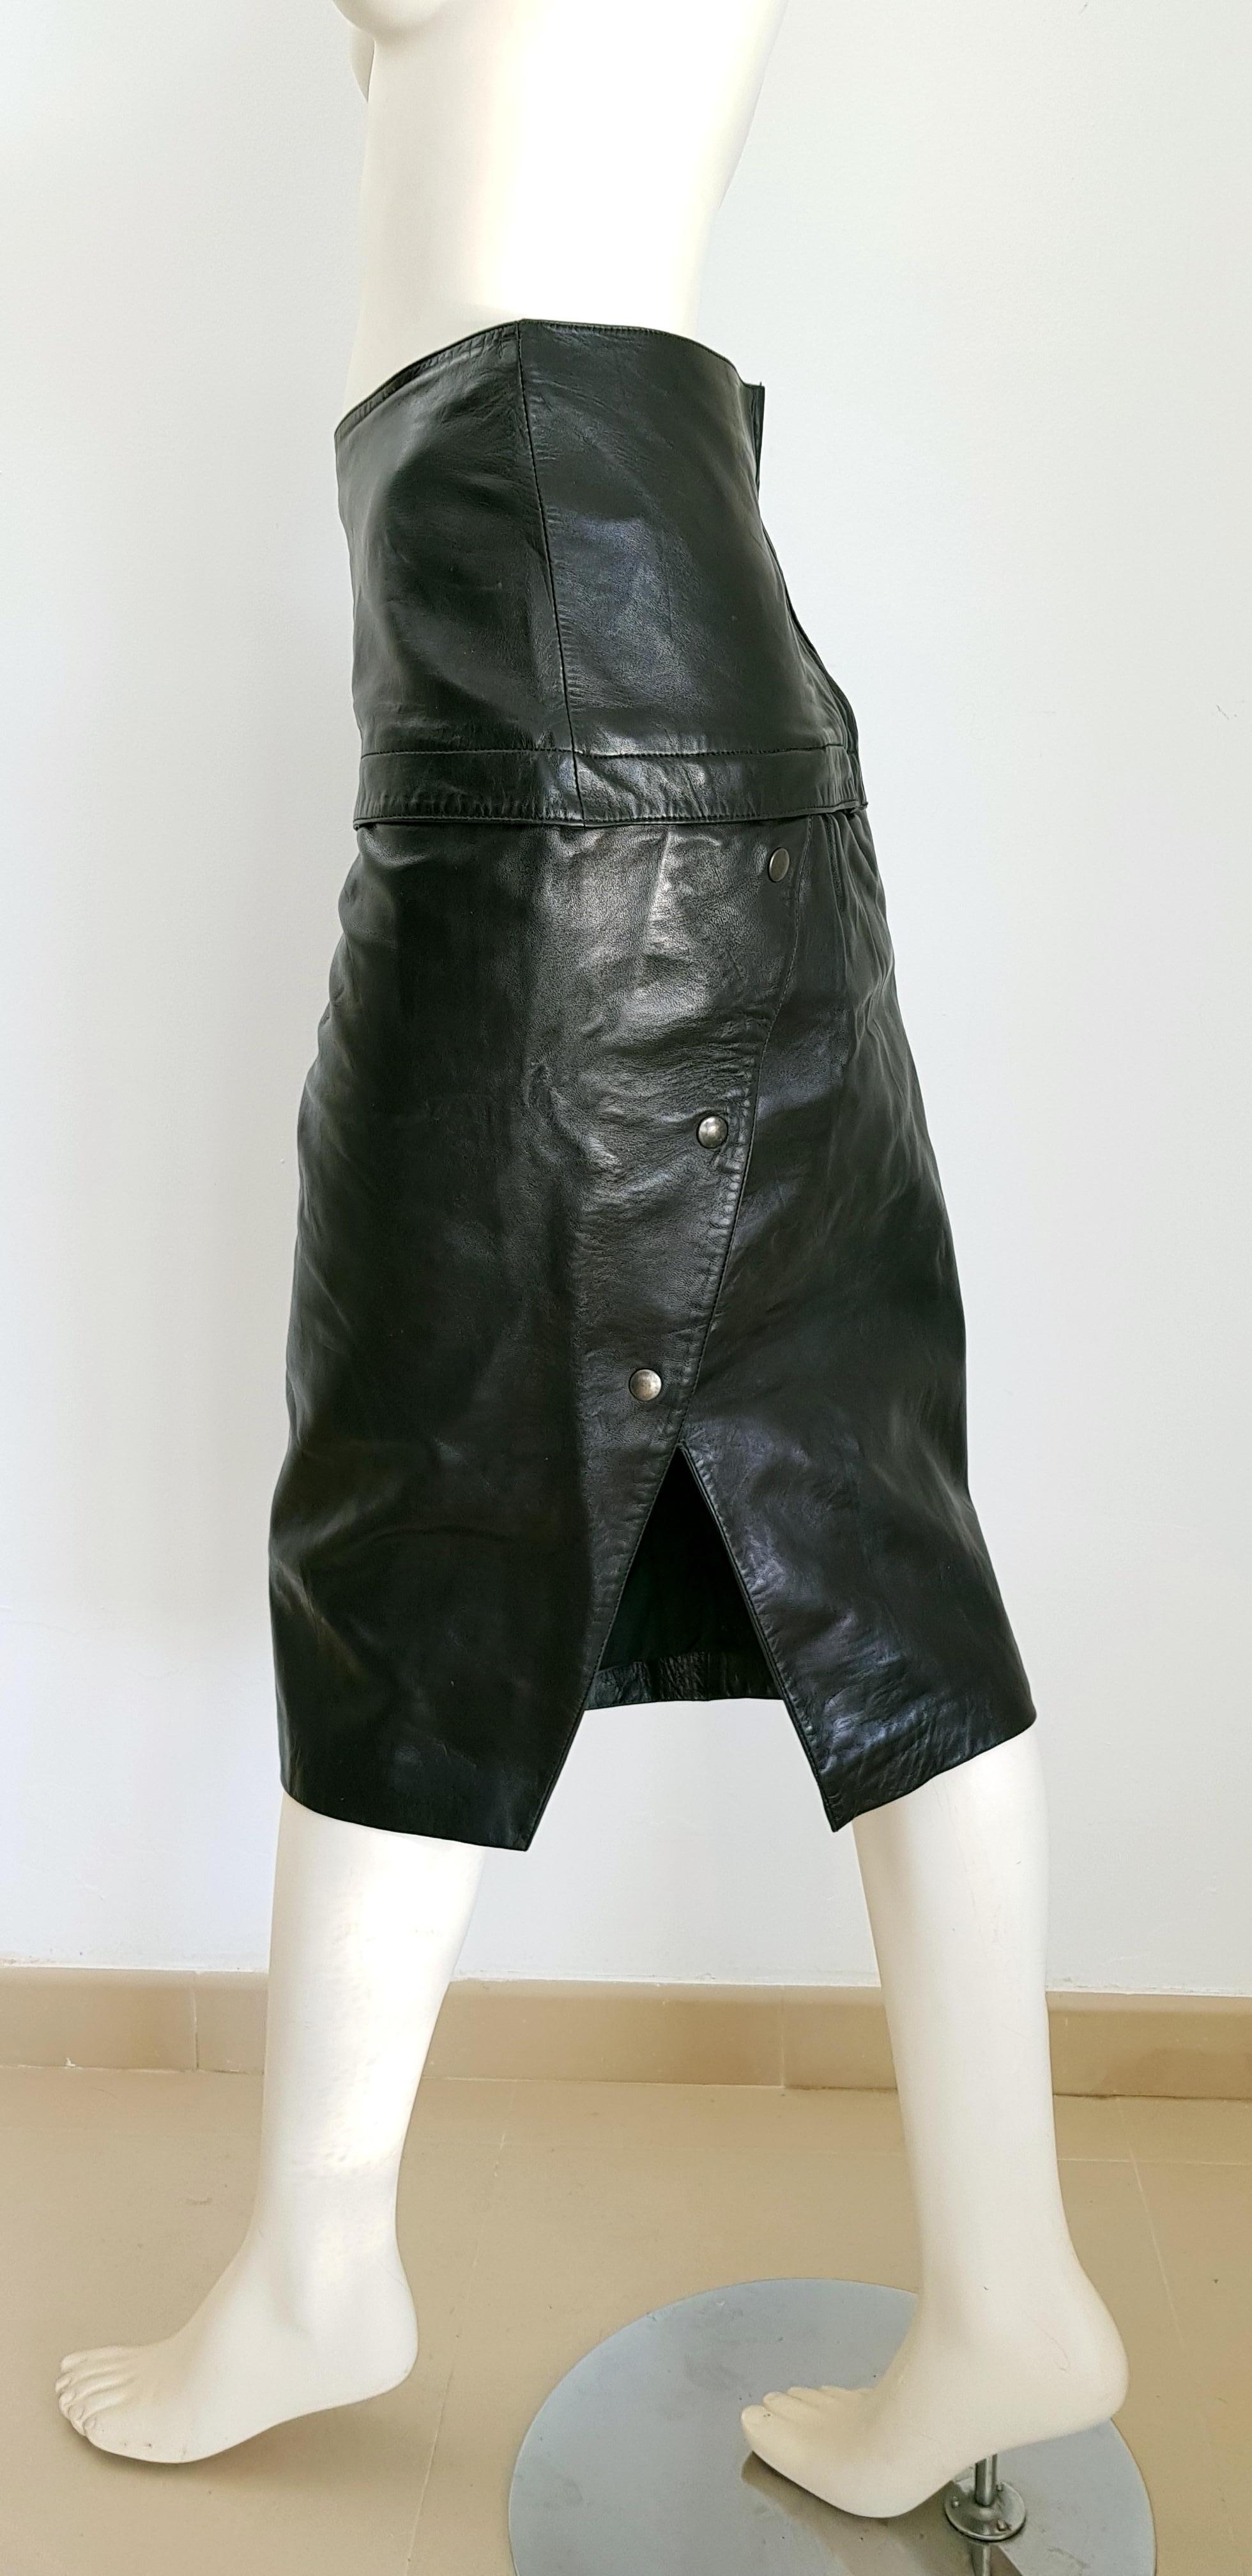 Claude MONTANA black lambskin leather high waistband skirt - Unworn, New

SIZE: equivalent to about Small / Medium, please review approx measurements as follows in cm: lenght 71, waist circumference 75, hip circumference 97.
TO CONVERT: cm x 0.39 =